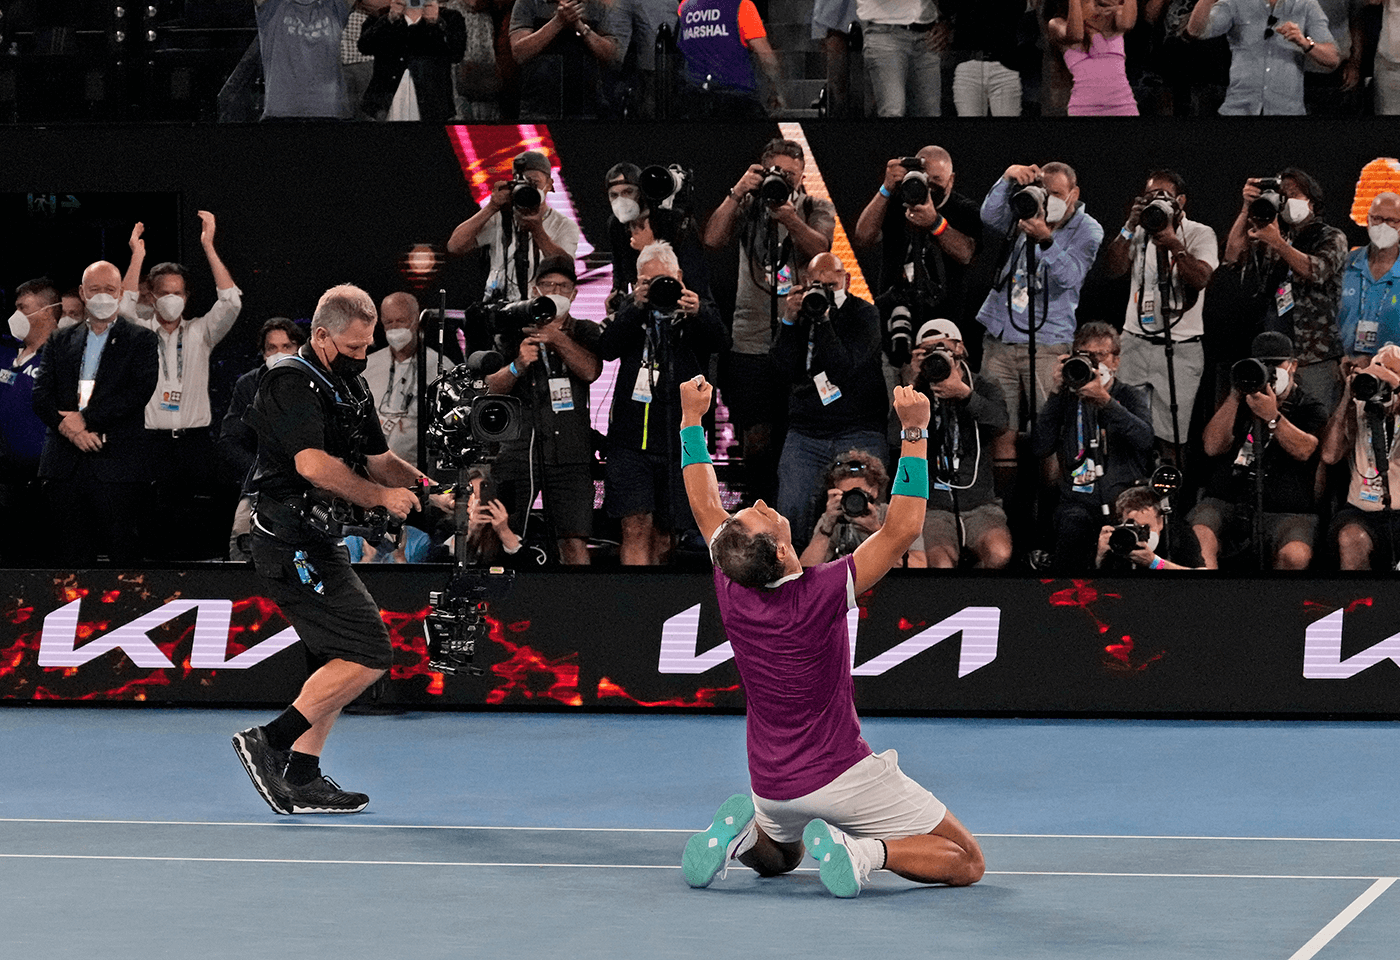 Sports photographer, Hamish Blair at this year’s major Australian tennis event pictured in back row, fifth photographer from the left. CREDIT: AP Photo / Simon Baker